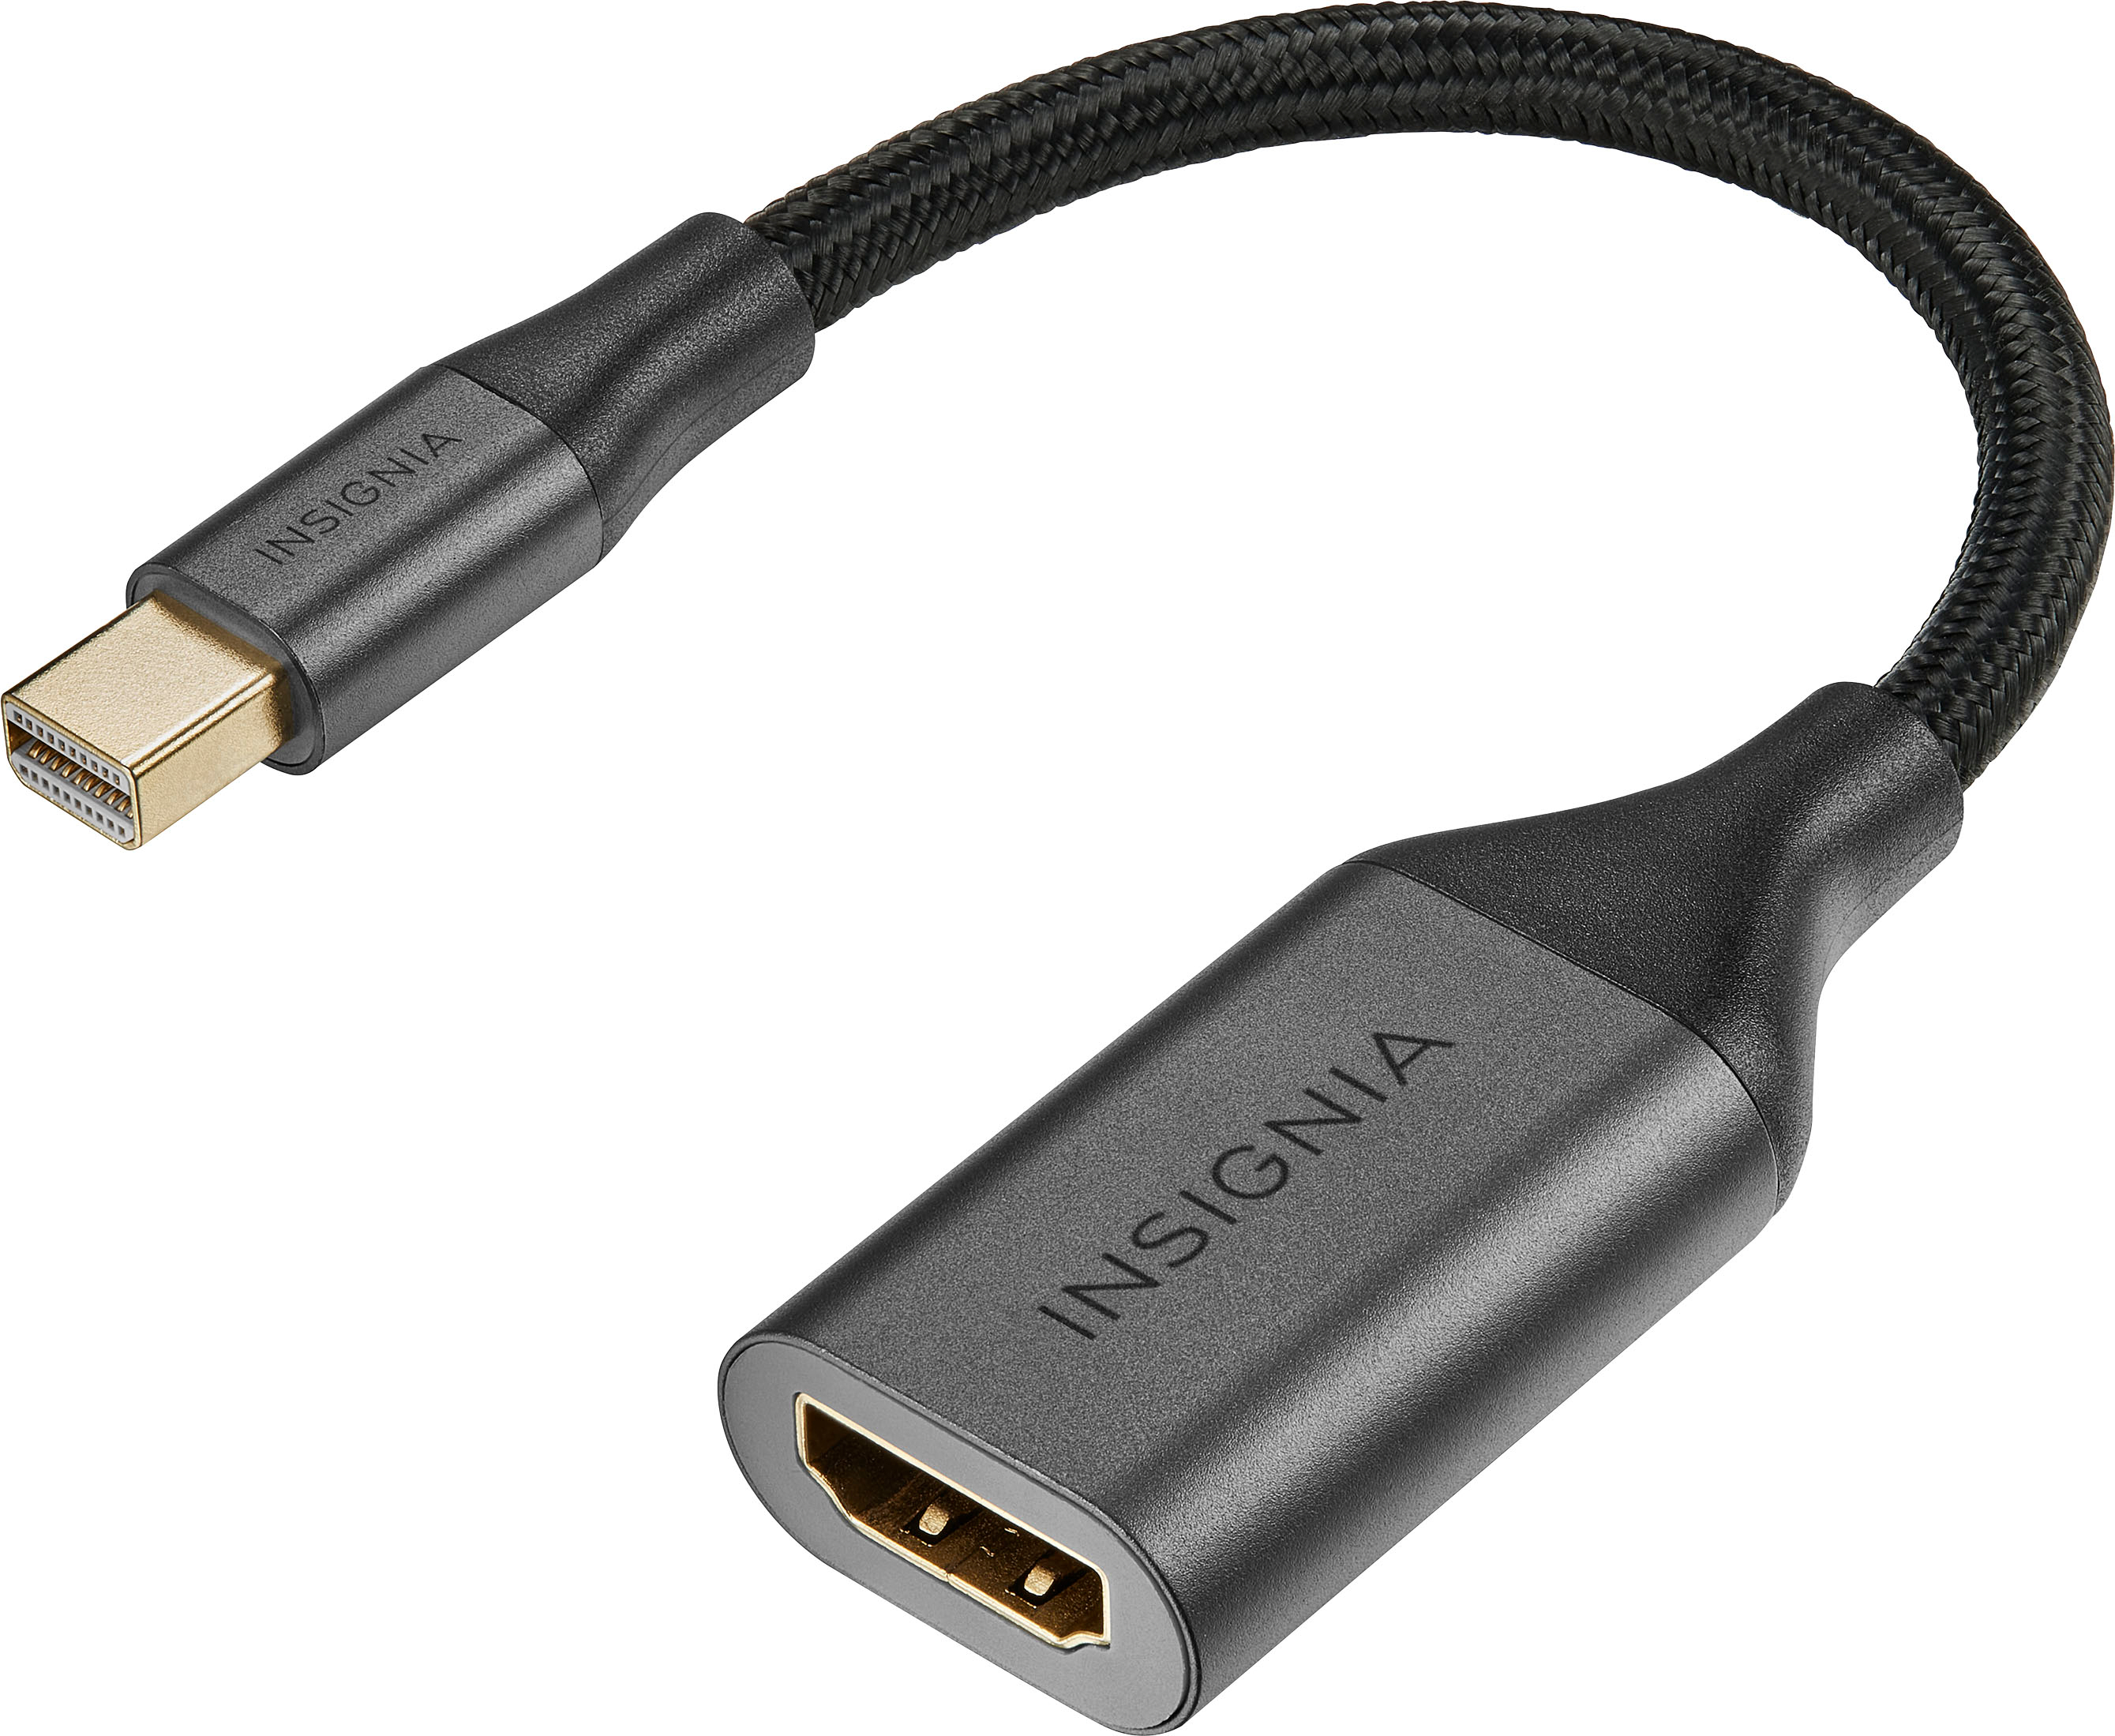 HDM1919C3, MicroConnect HDMI 1.4 Type A - HDMI Mini Type C Cable, 3m